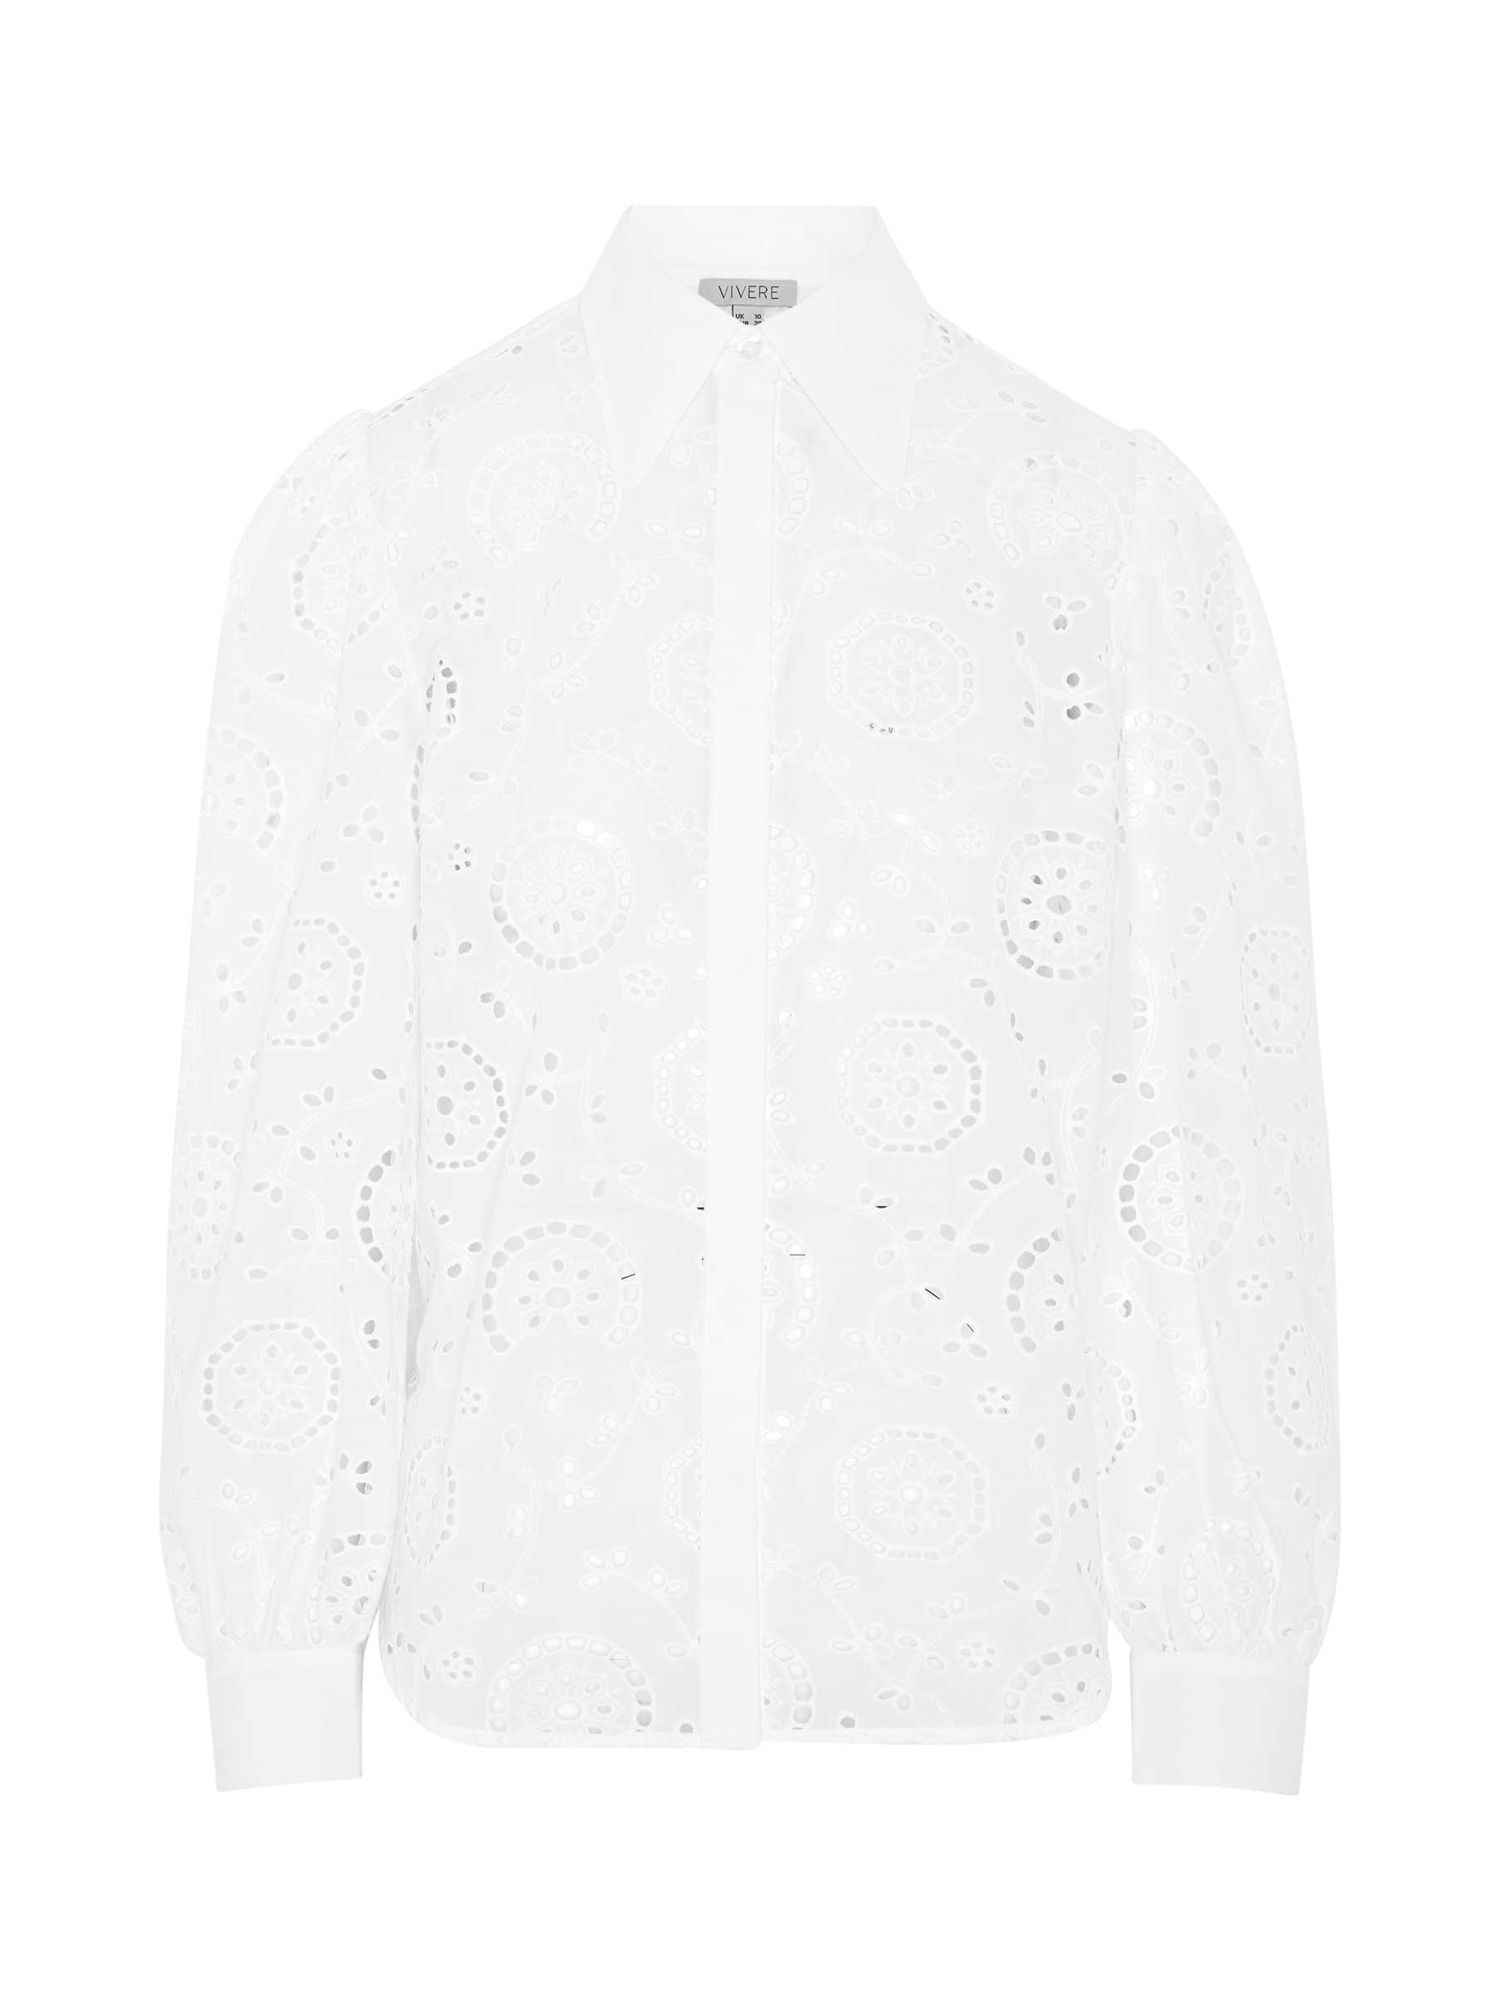 Vivere By Savannah Miller Ava Broderie Anglaise Puff Sleeve Blouse, White, 6